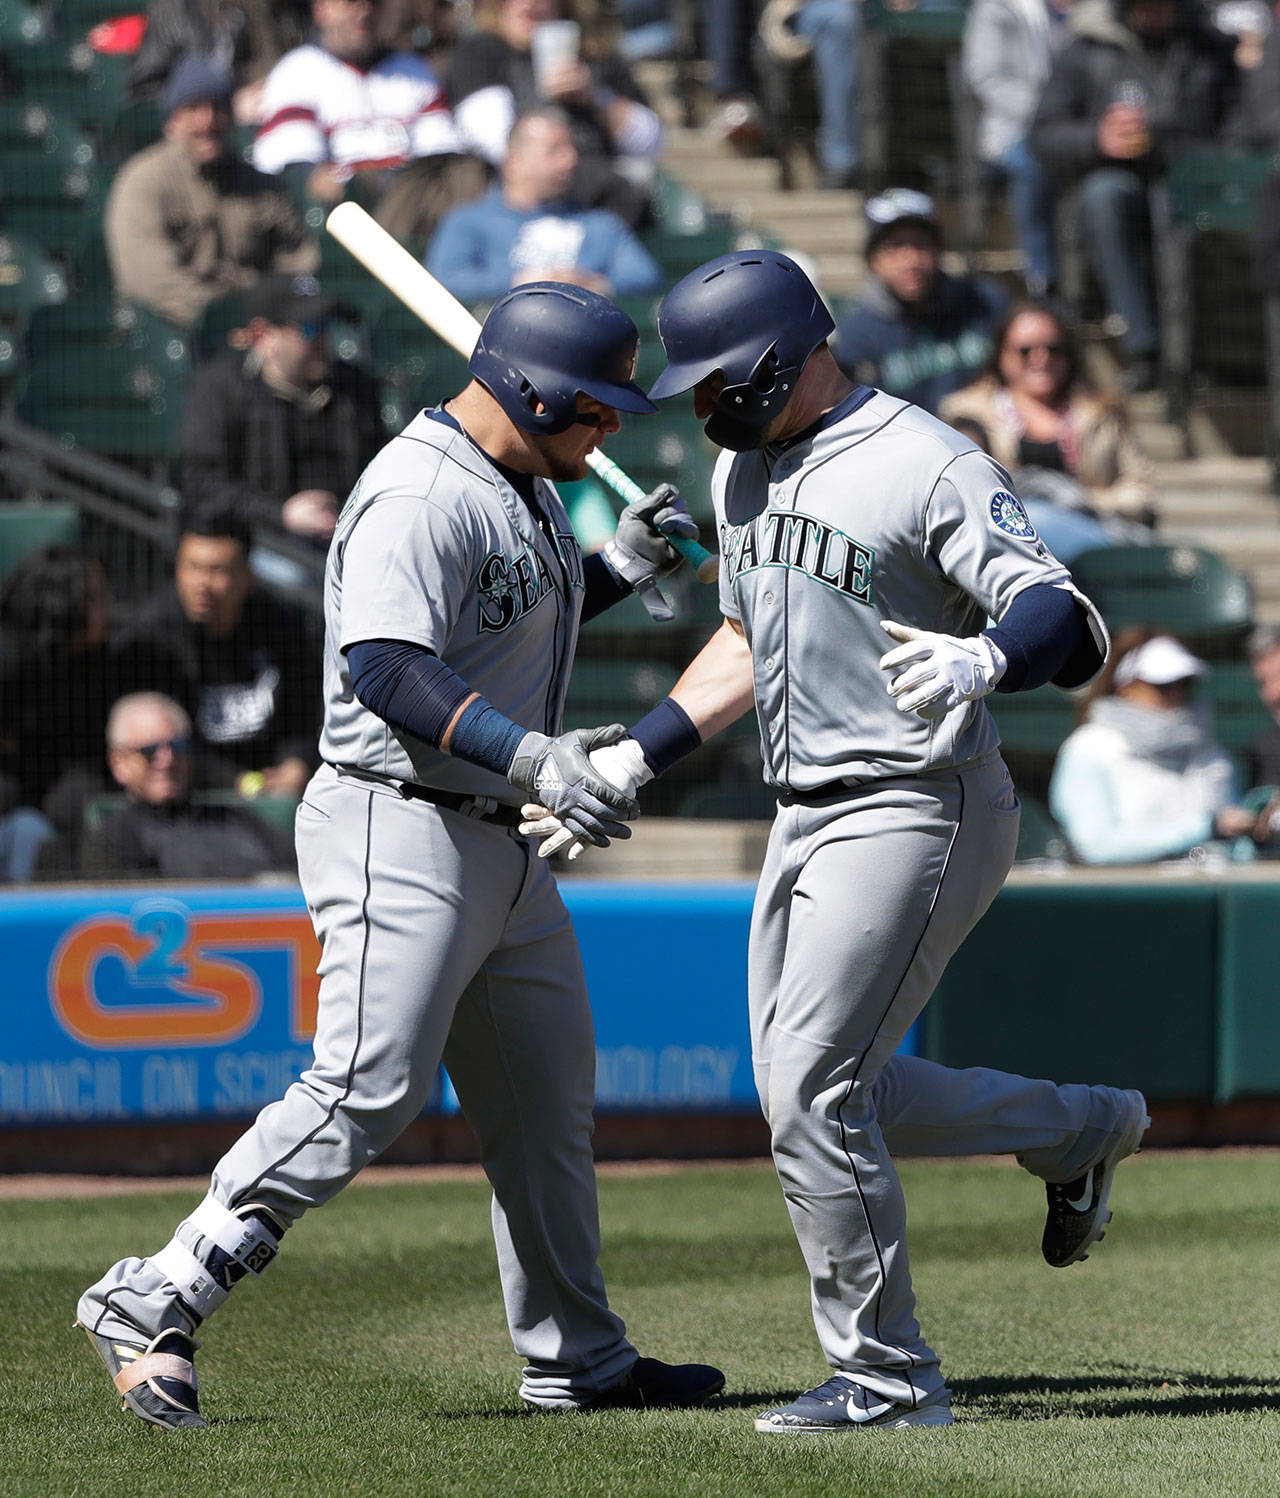 Seattle’s Mike Zunino (right) greets teammate Daniel Vogelbach at home plate after Zunino hit a home run during the sixth inning of Wednesday’s game in Chicago. (AP Photo/Charles Rex Arbogast)